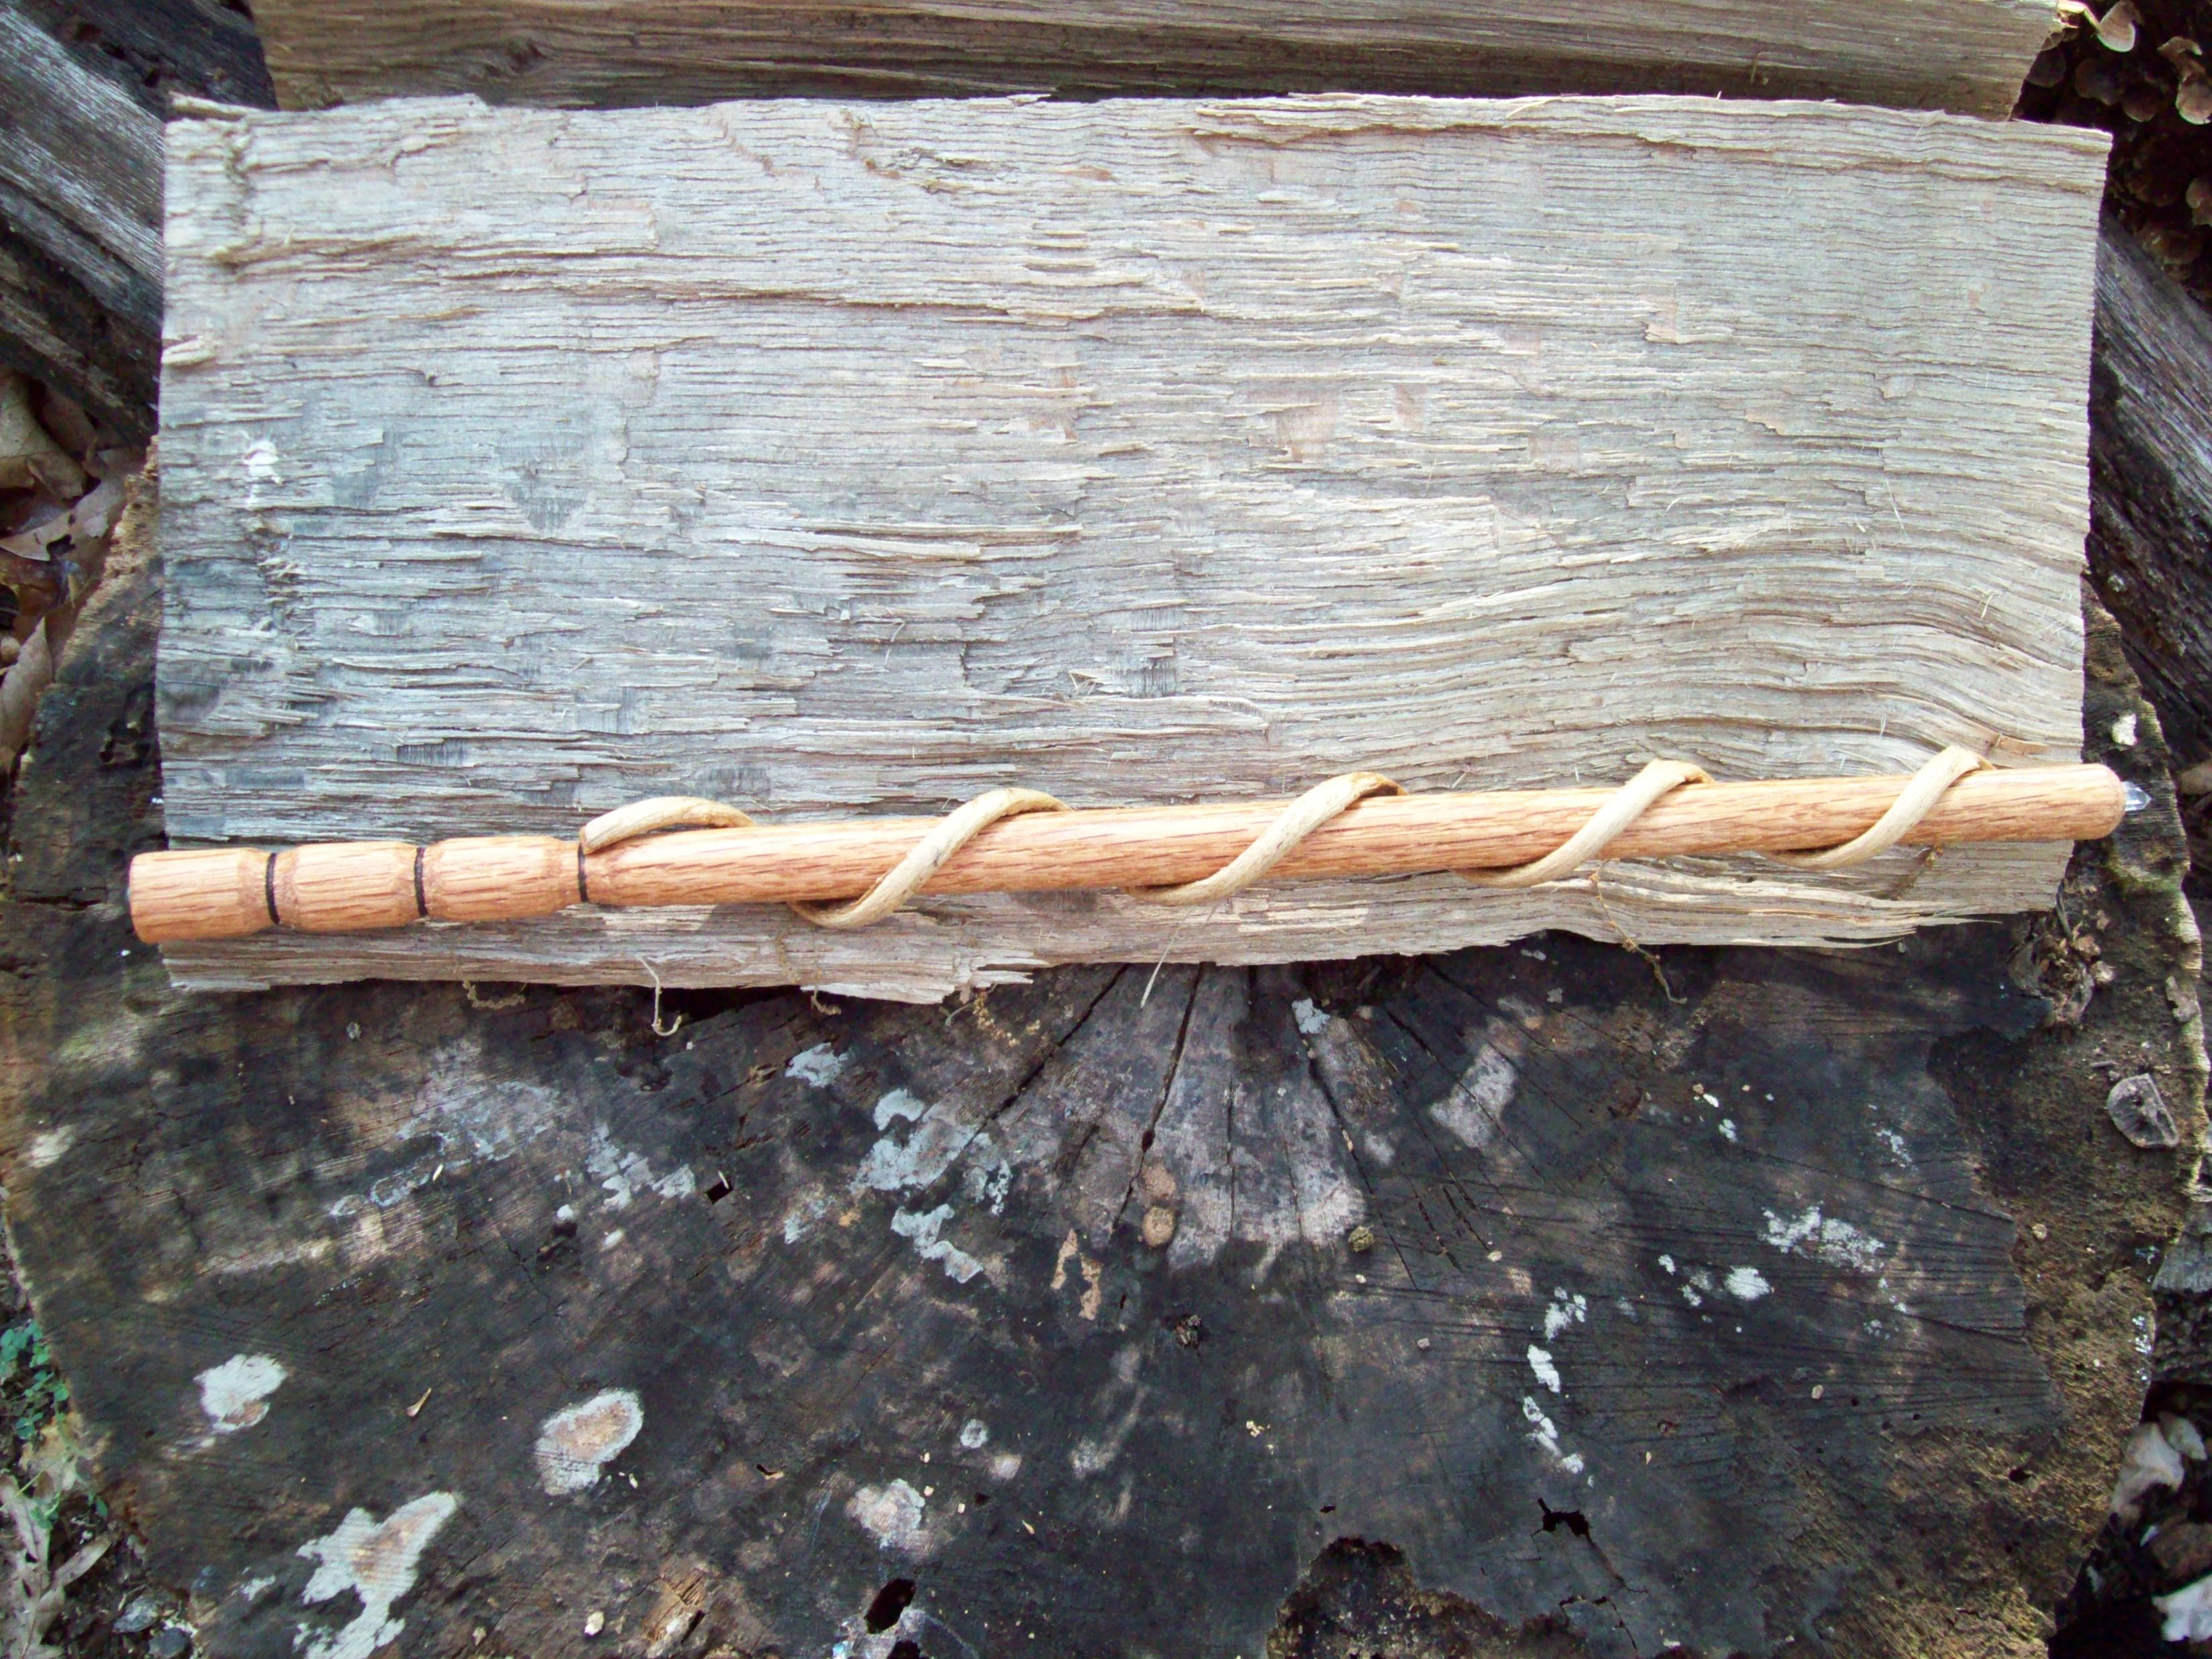 Oak and Vine Witches Wand